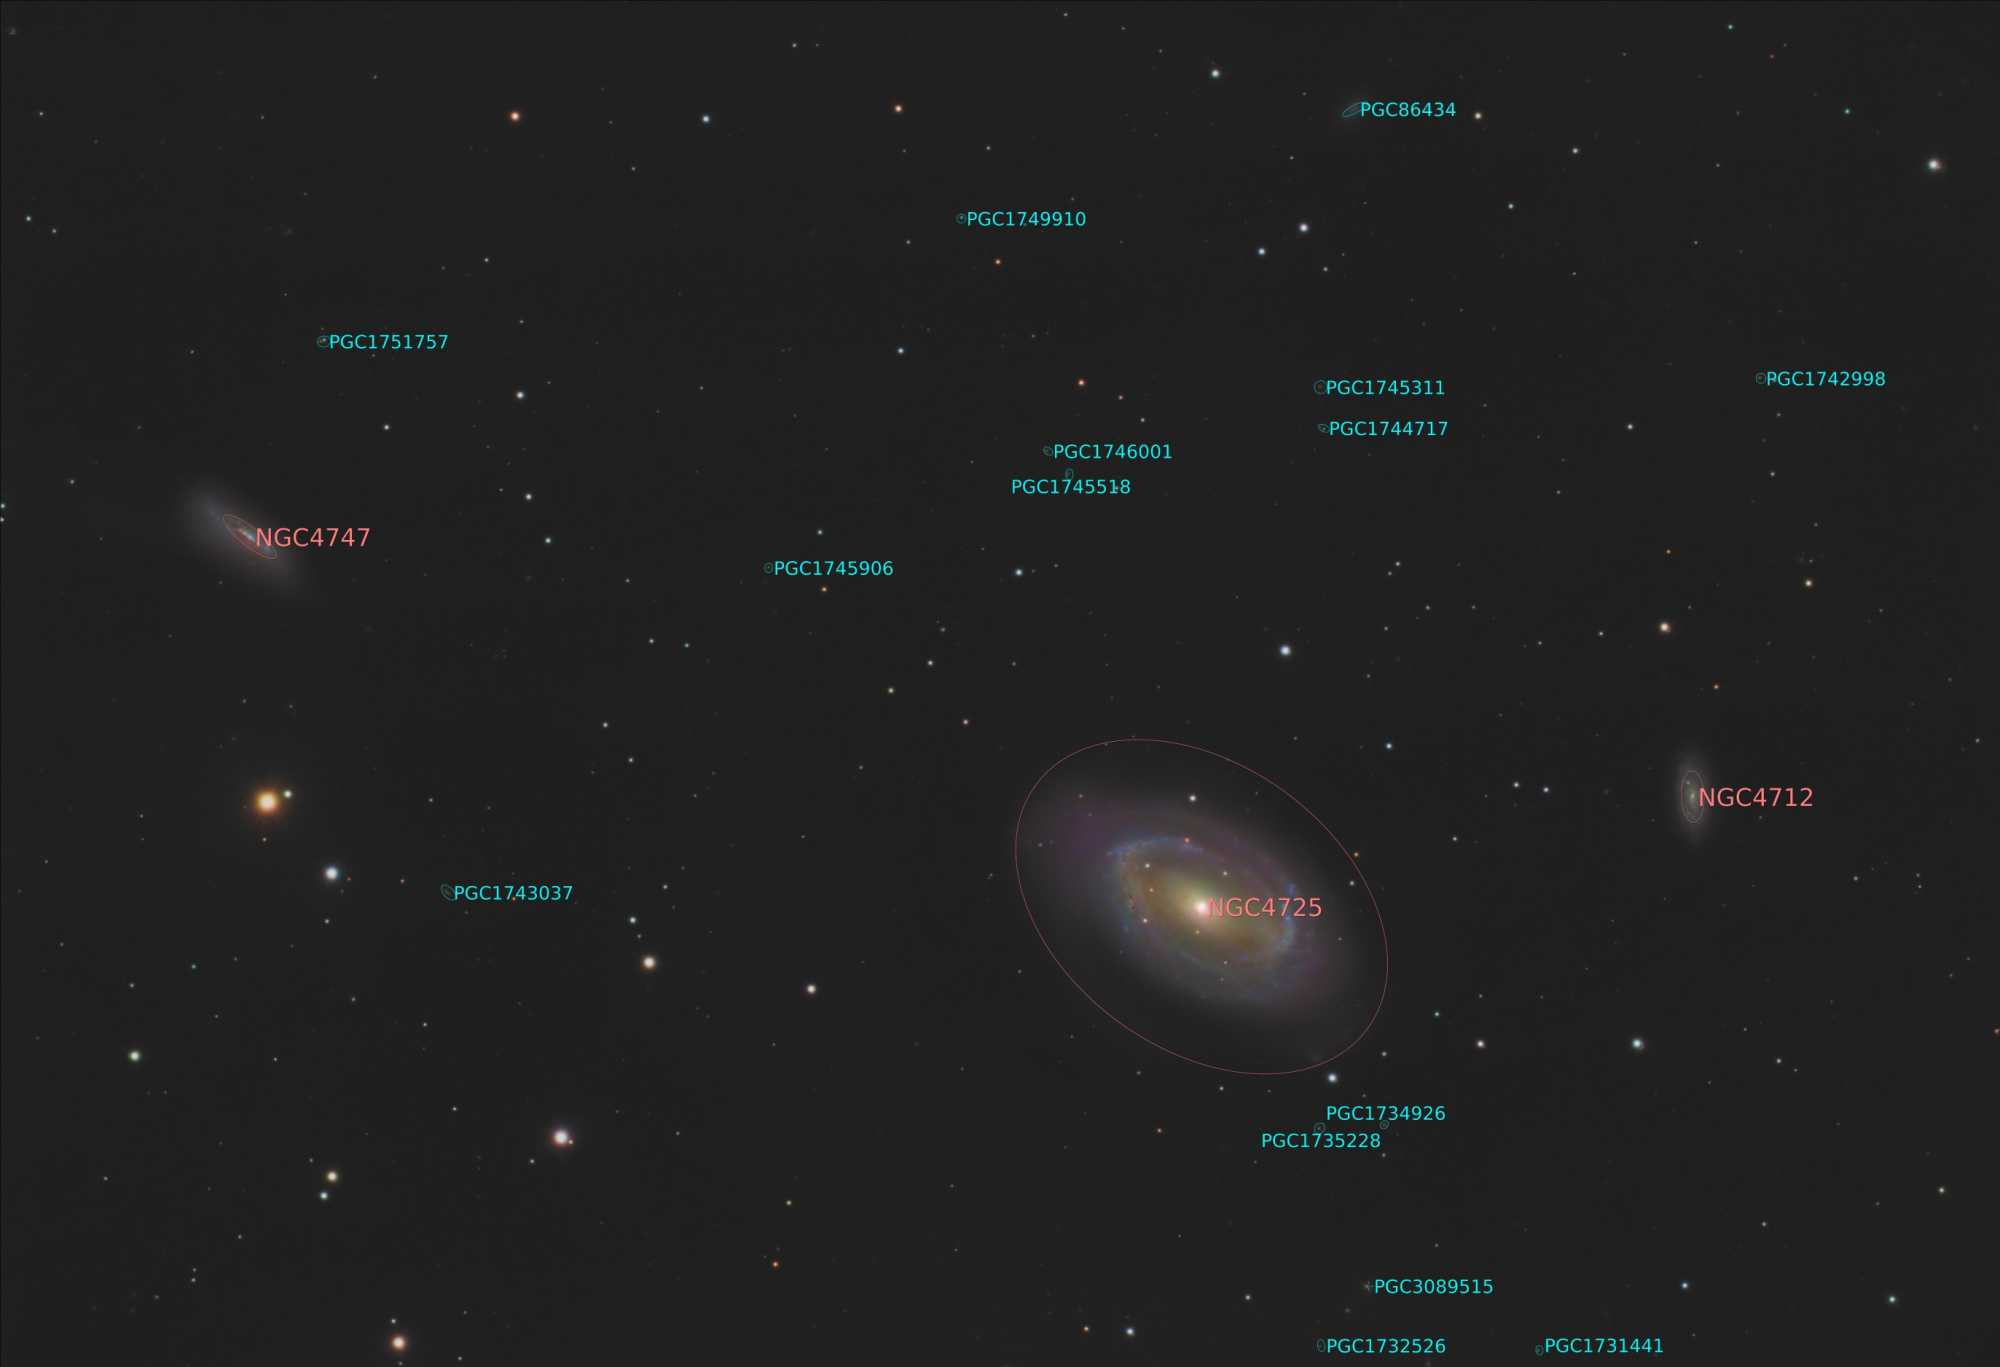 NGC4725-r_pp_images_stacked-finale-V3-annotated.thumb.jpg.f73e7f398e7a038a4463eb6ff0823d2a.jpg